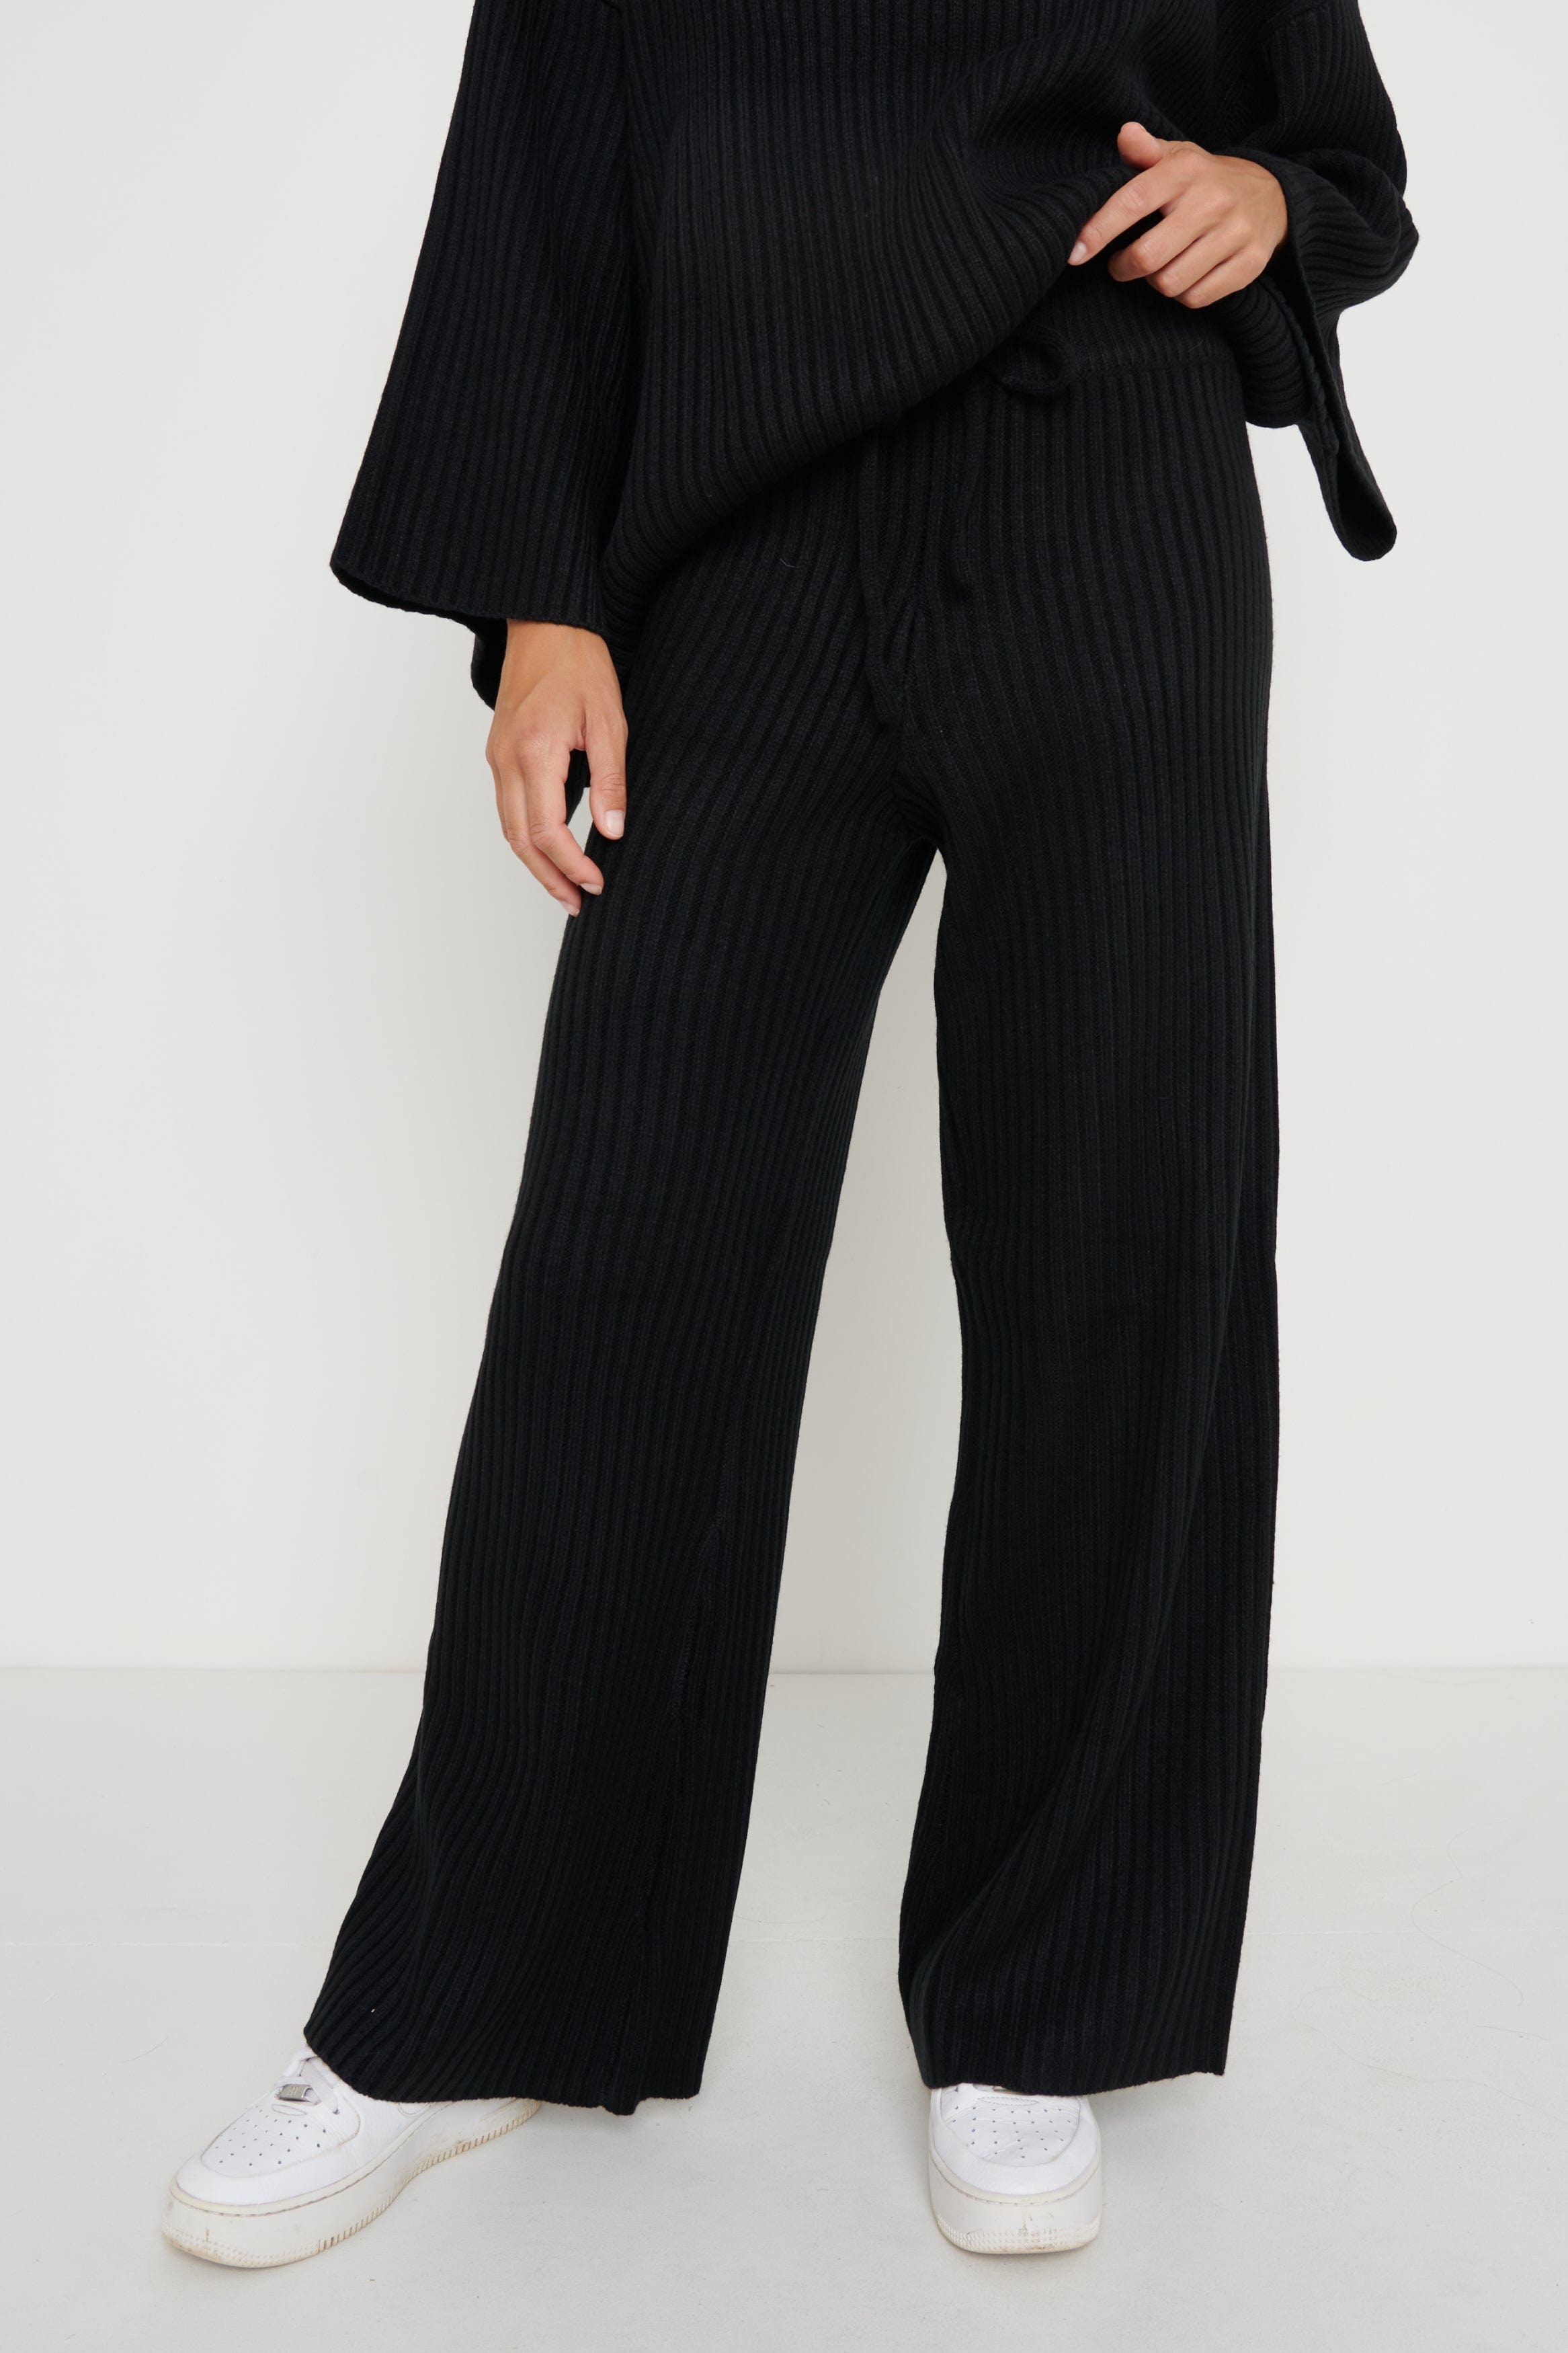 Lina Ribbed Trousers- Black